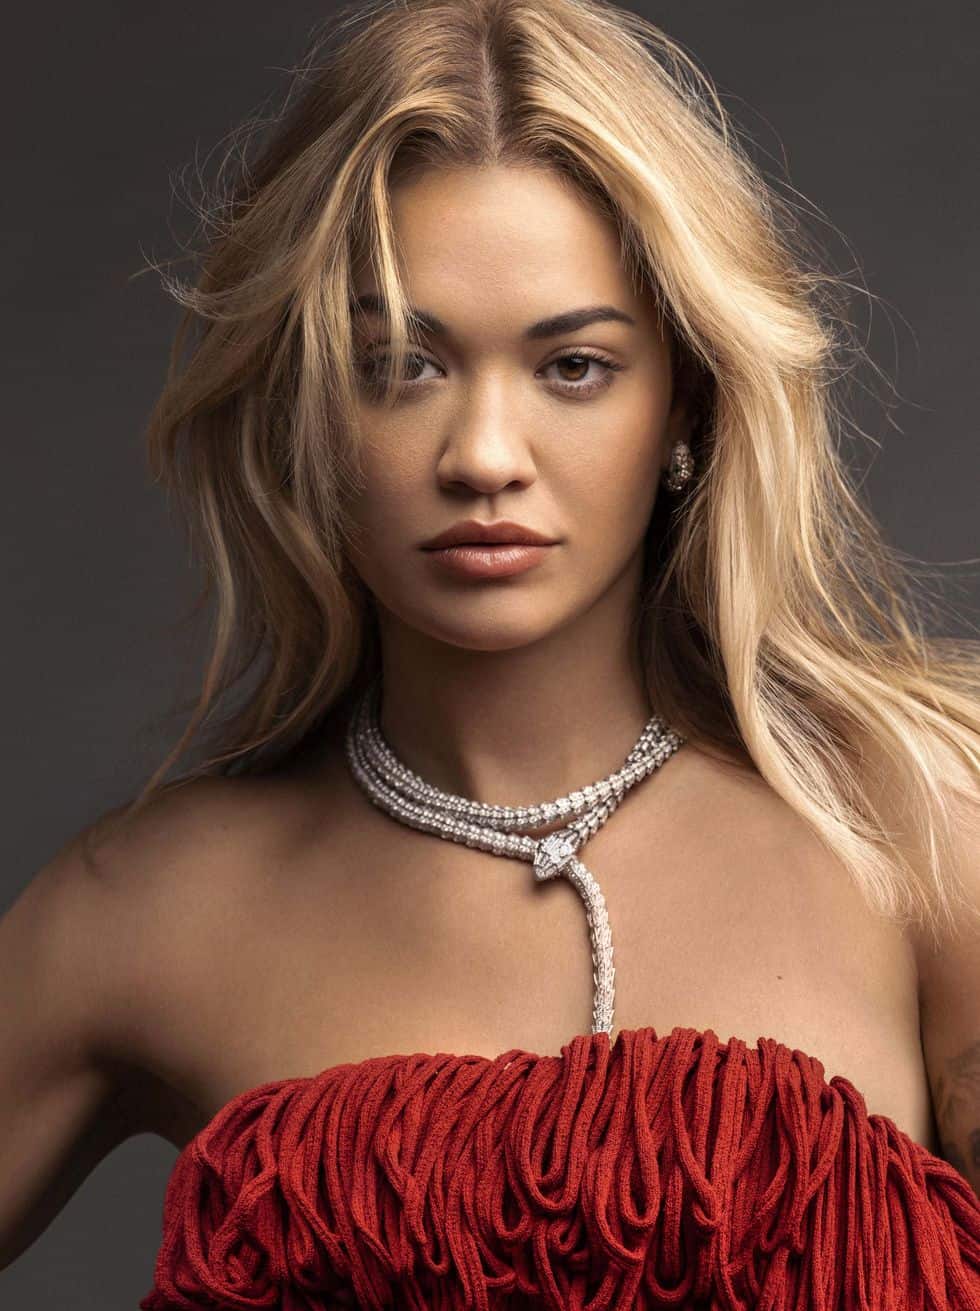 Rita Ora is the Cover Star of ELLE Magazine Spain March 2022 Issue